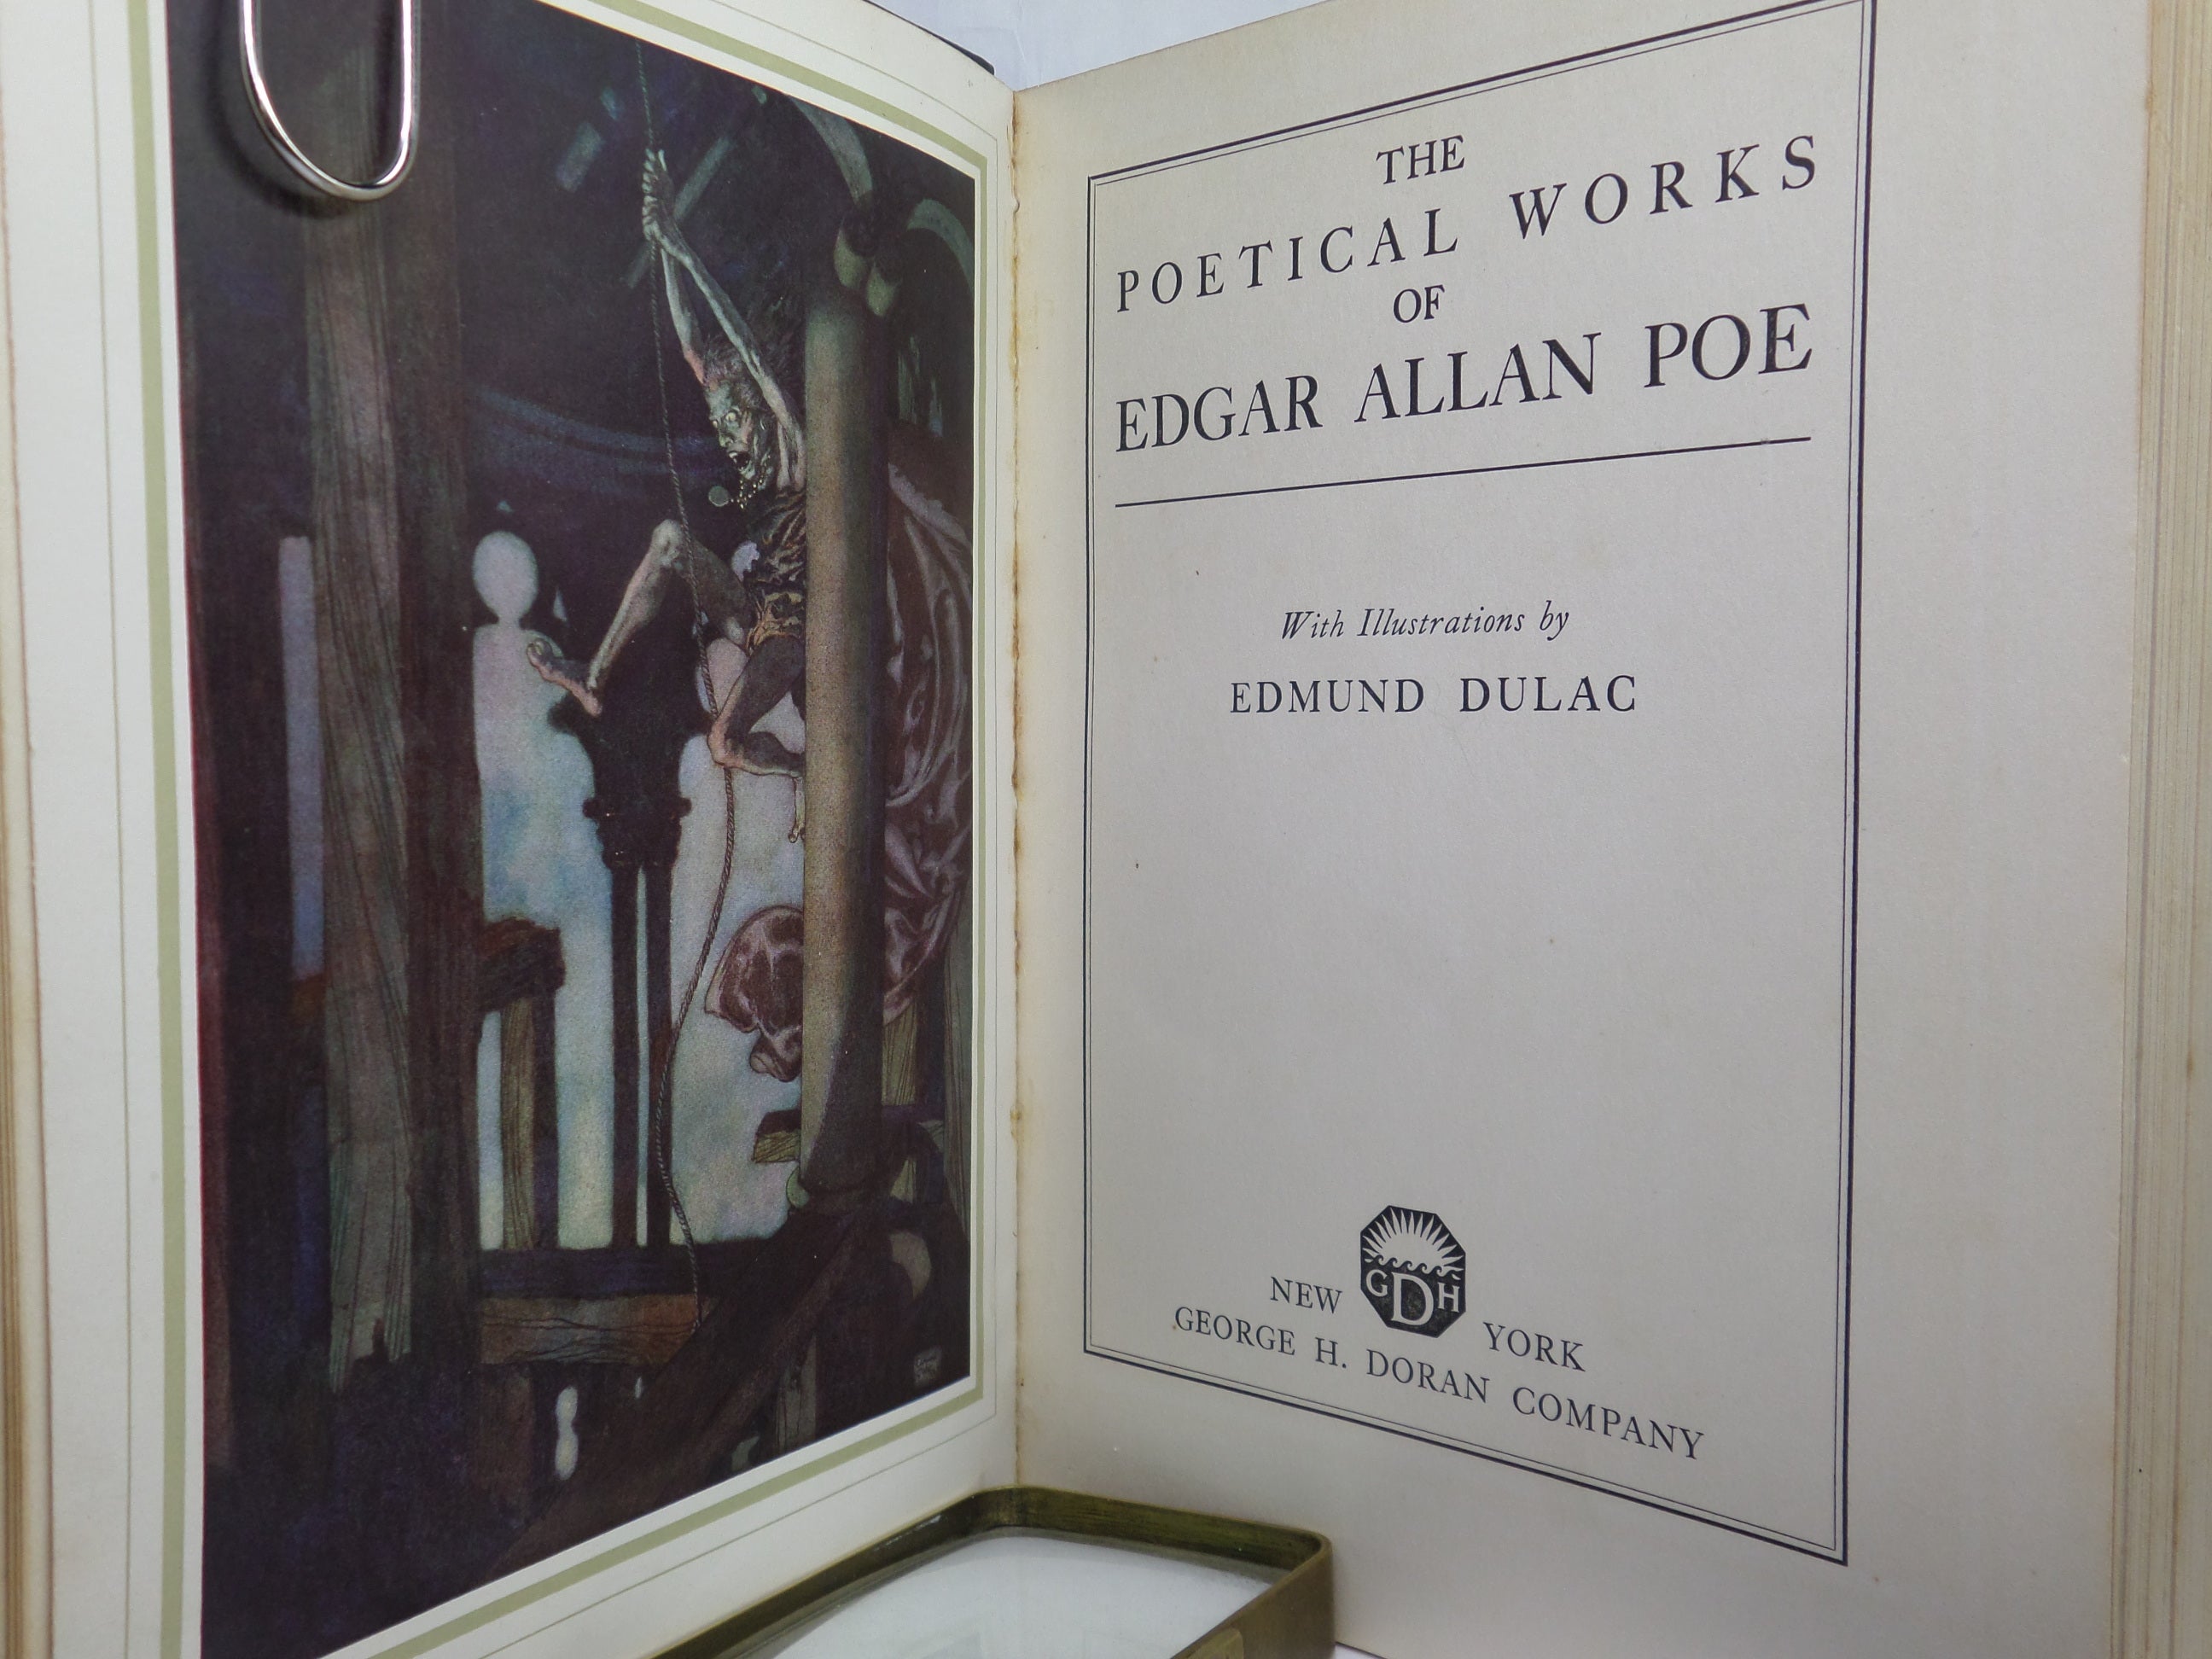 THE POETICAL WORKS OF EDGAR ALLAN POE, LEATHER-BOUND, EDMUND DULAC ILLUSTRATIONS